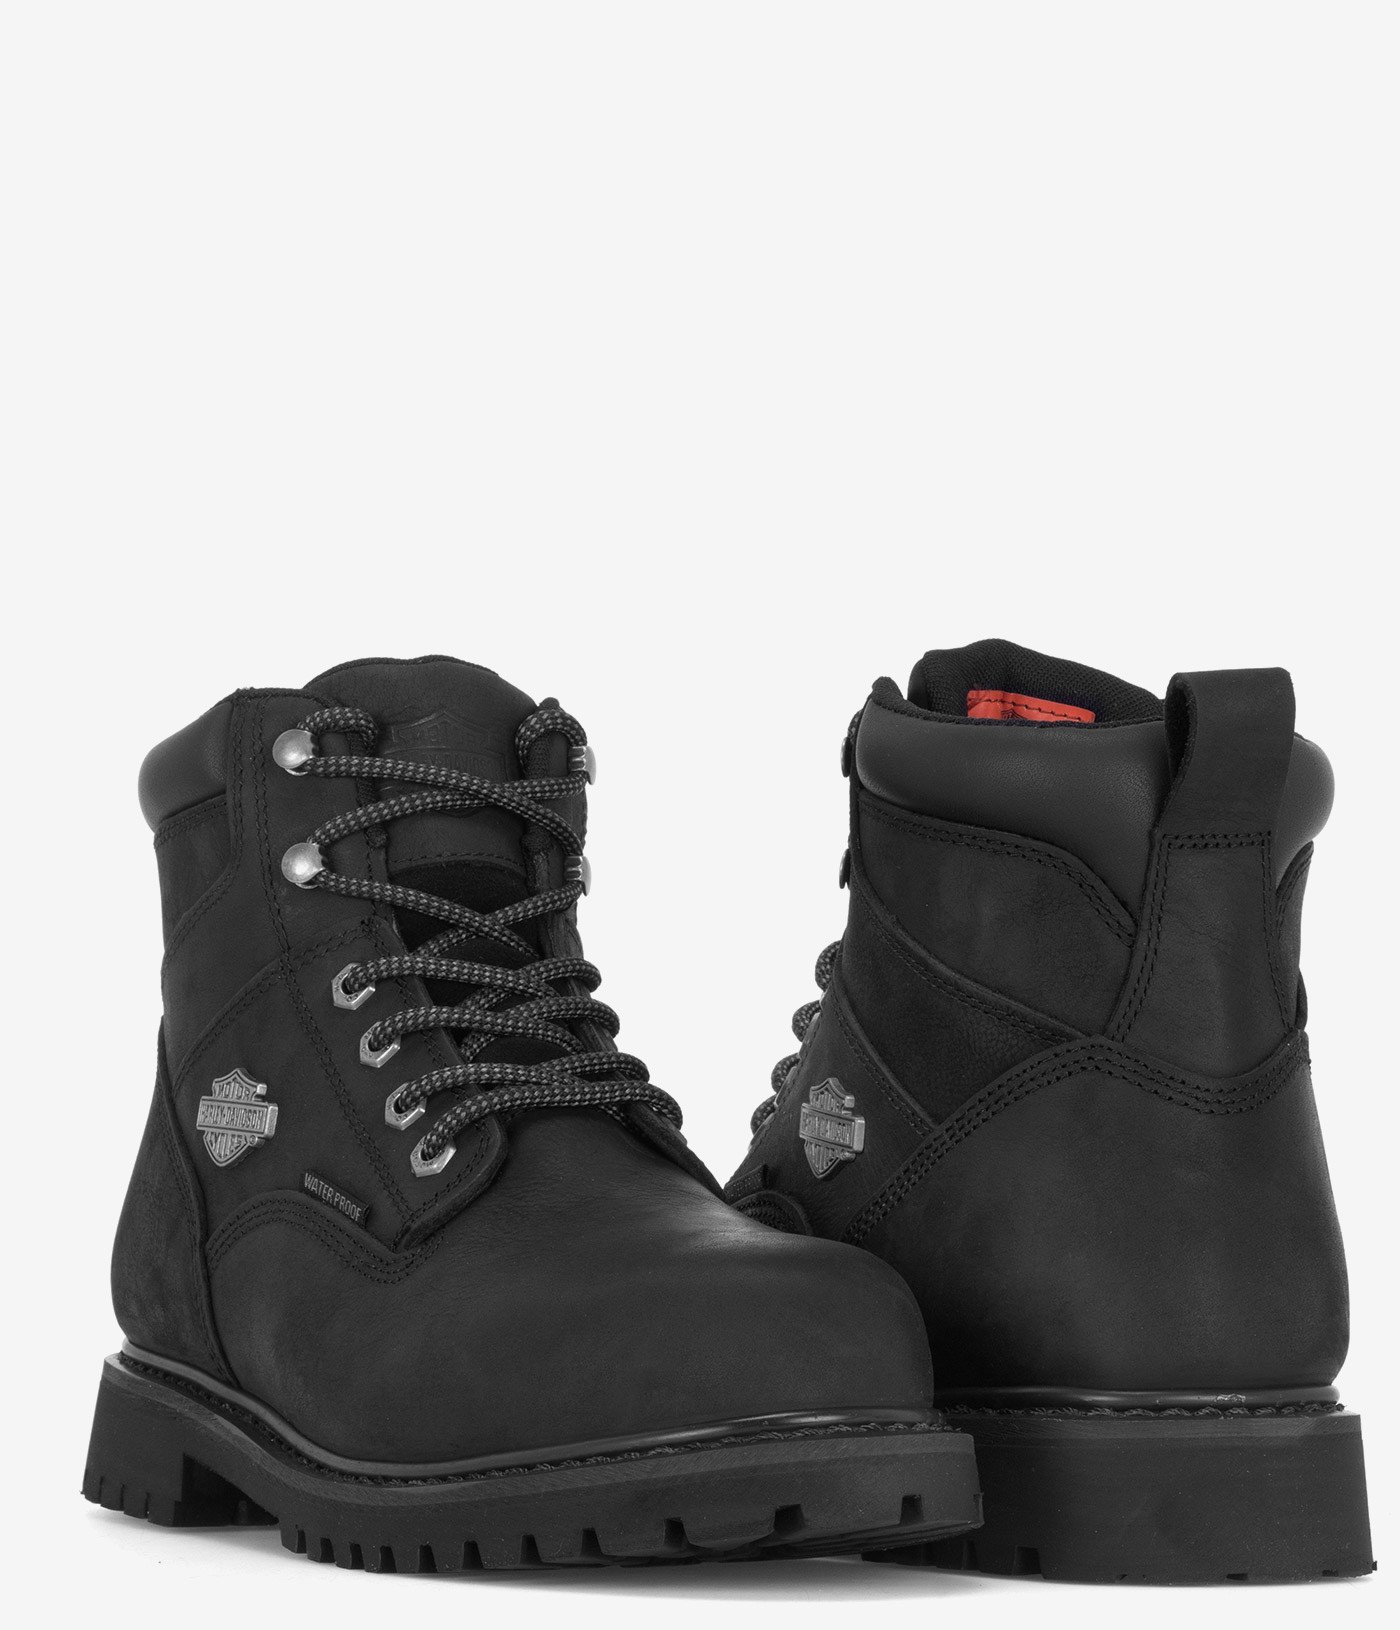 Expect it Emulate Strength Harley-Davidson Gavern Composite Safety Toe Boot | Boot World